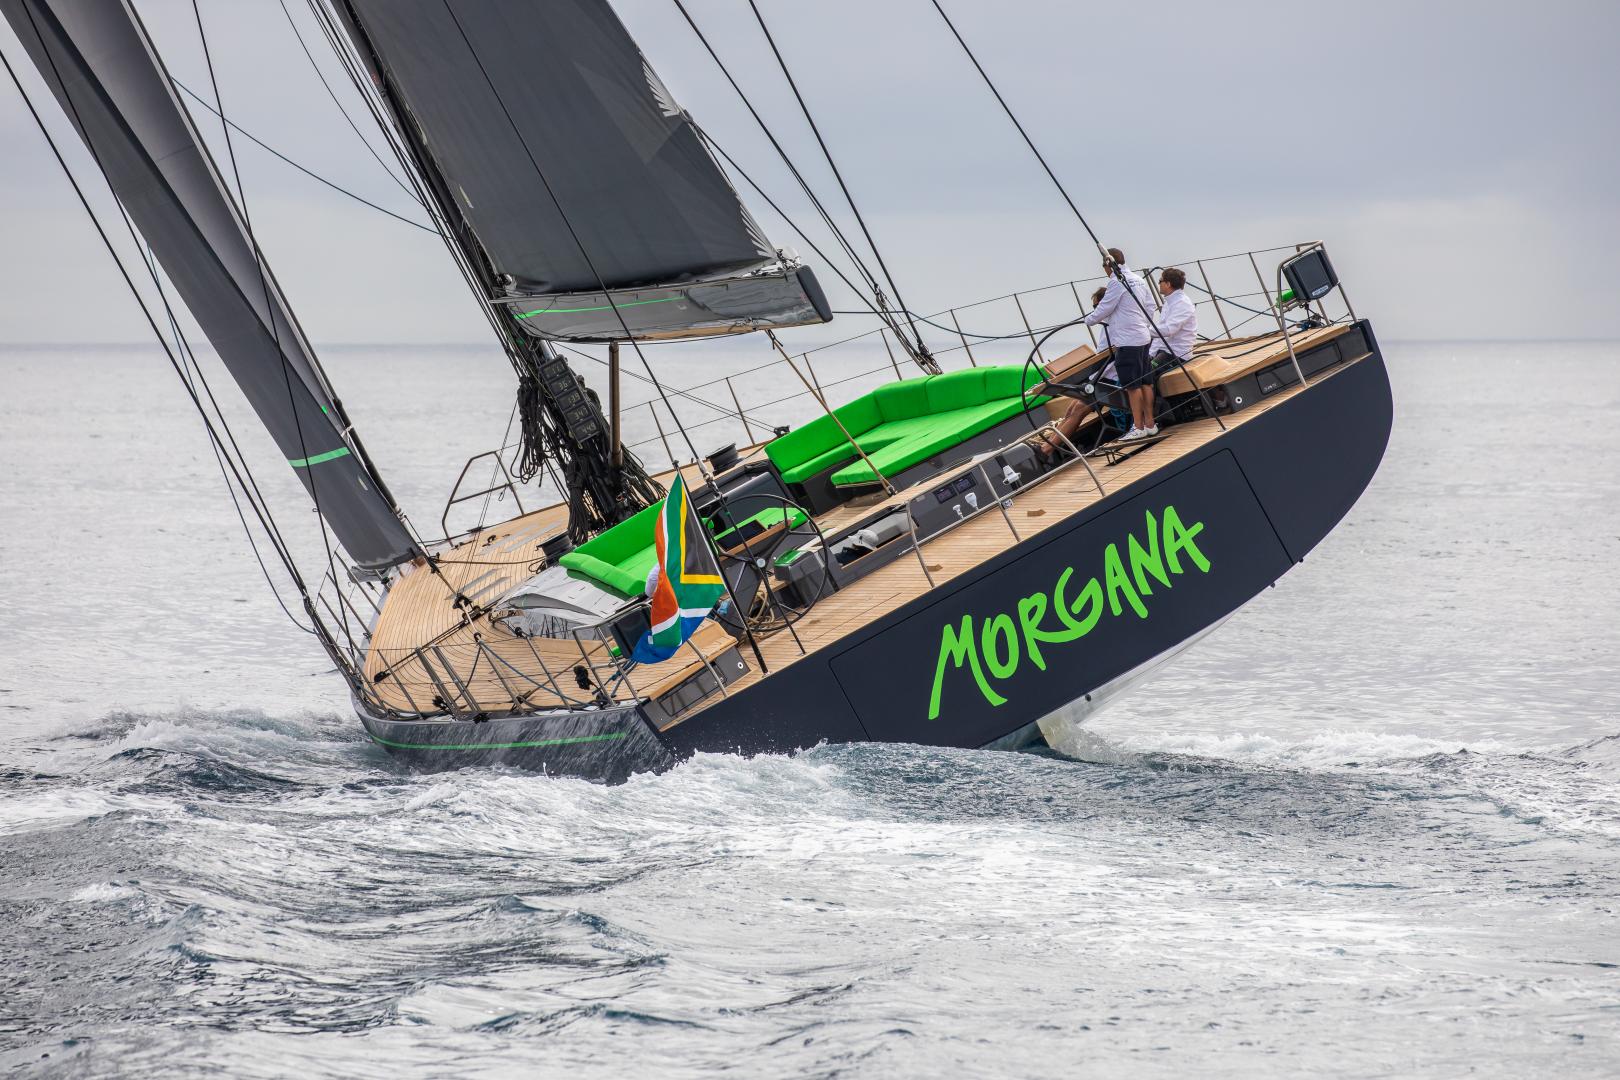 The deck plan and cockpit design of Morgana is the latest evolution in a long-running series of projects by Nauta Design